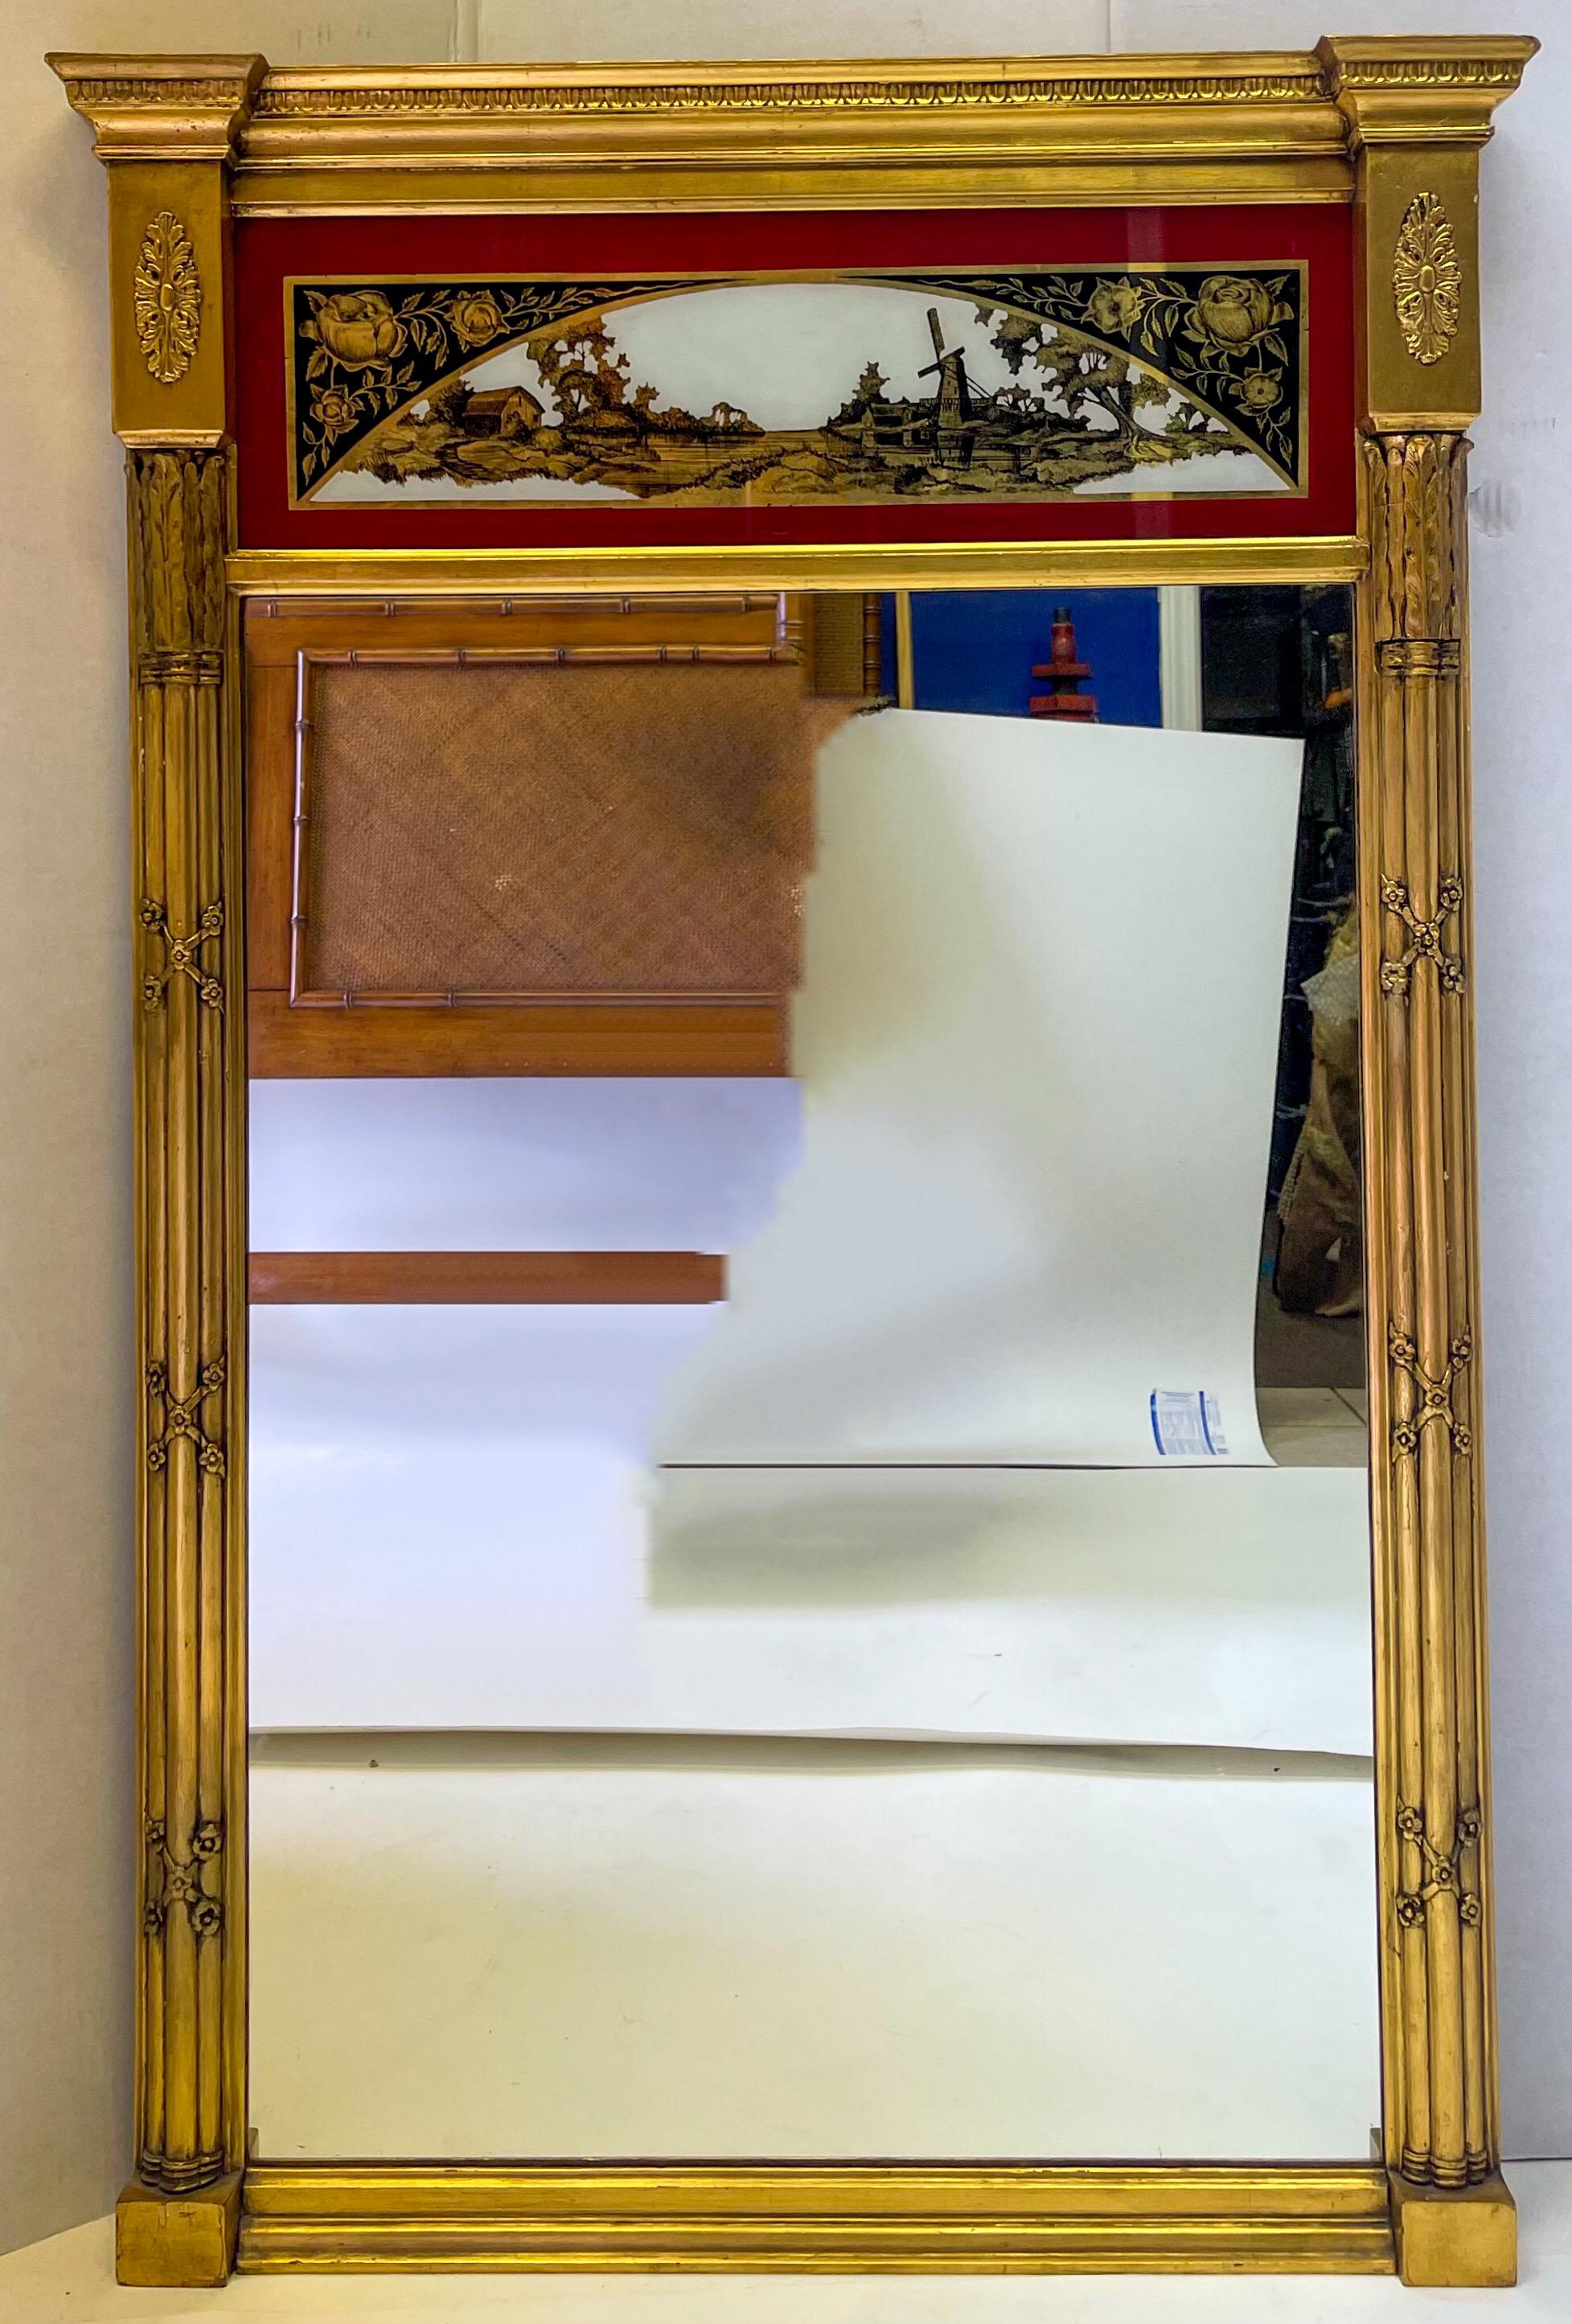 This is an exceptional French water gilt trumeau mirror with neoclassical styling. The panel is eglomise with a pastoral scene in a deep red, black and gilt. It dates to the late 19th century and is in very good condition.